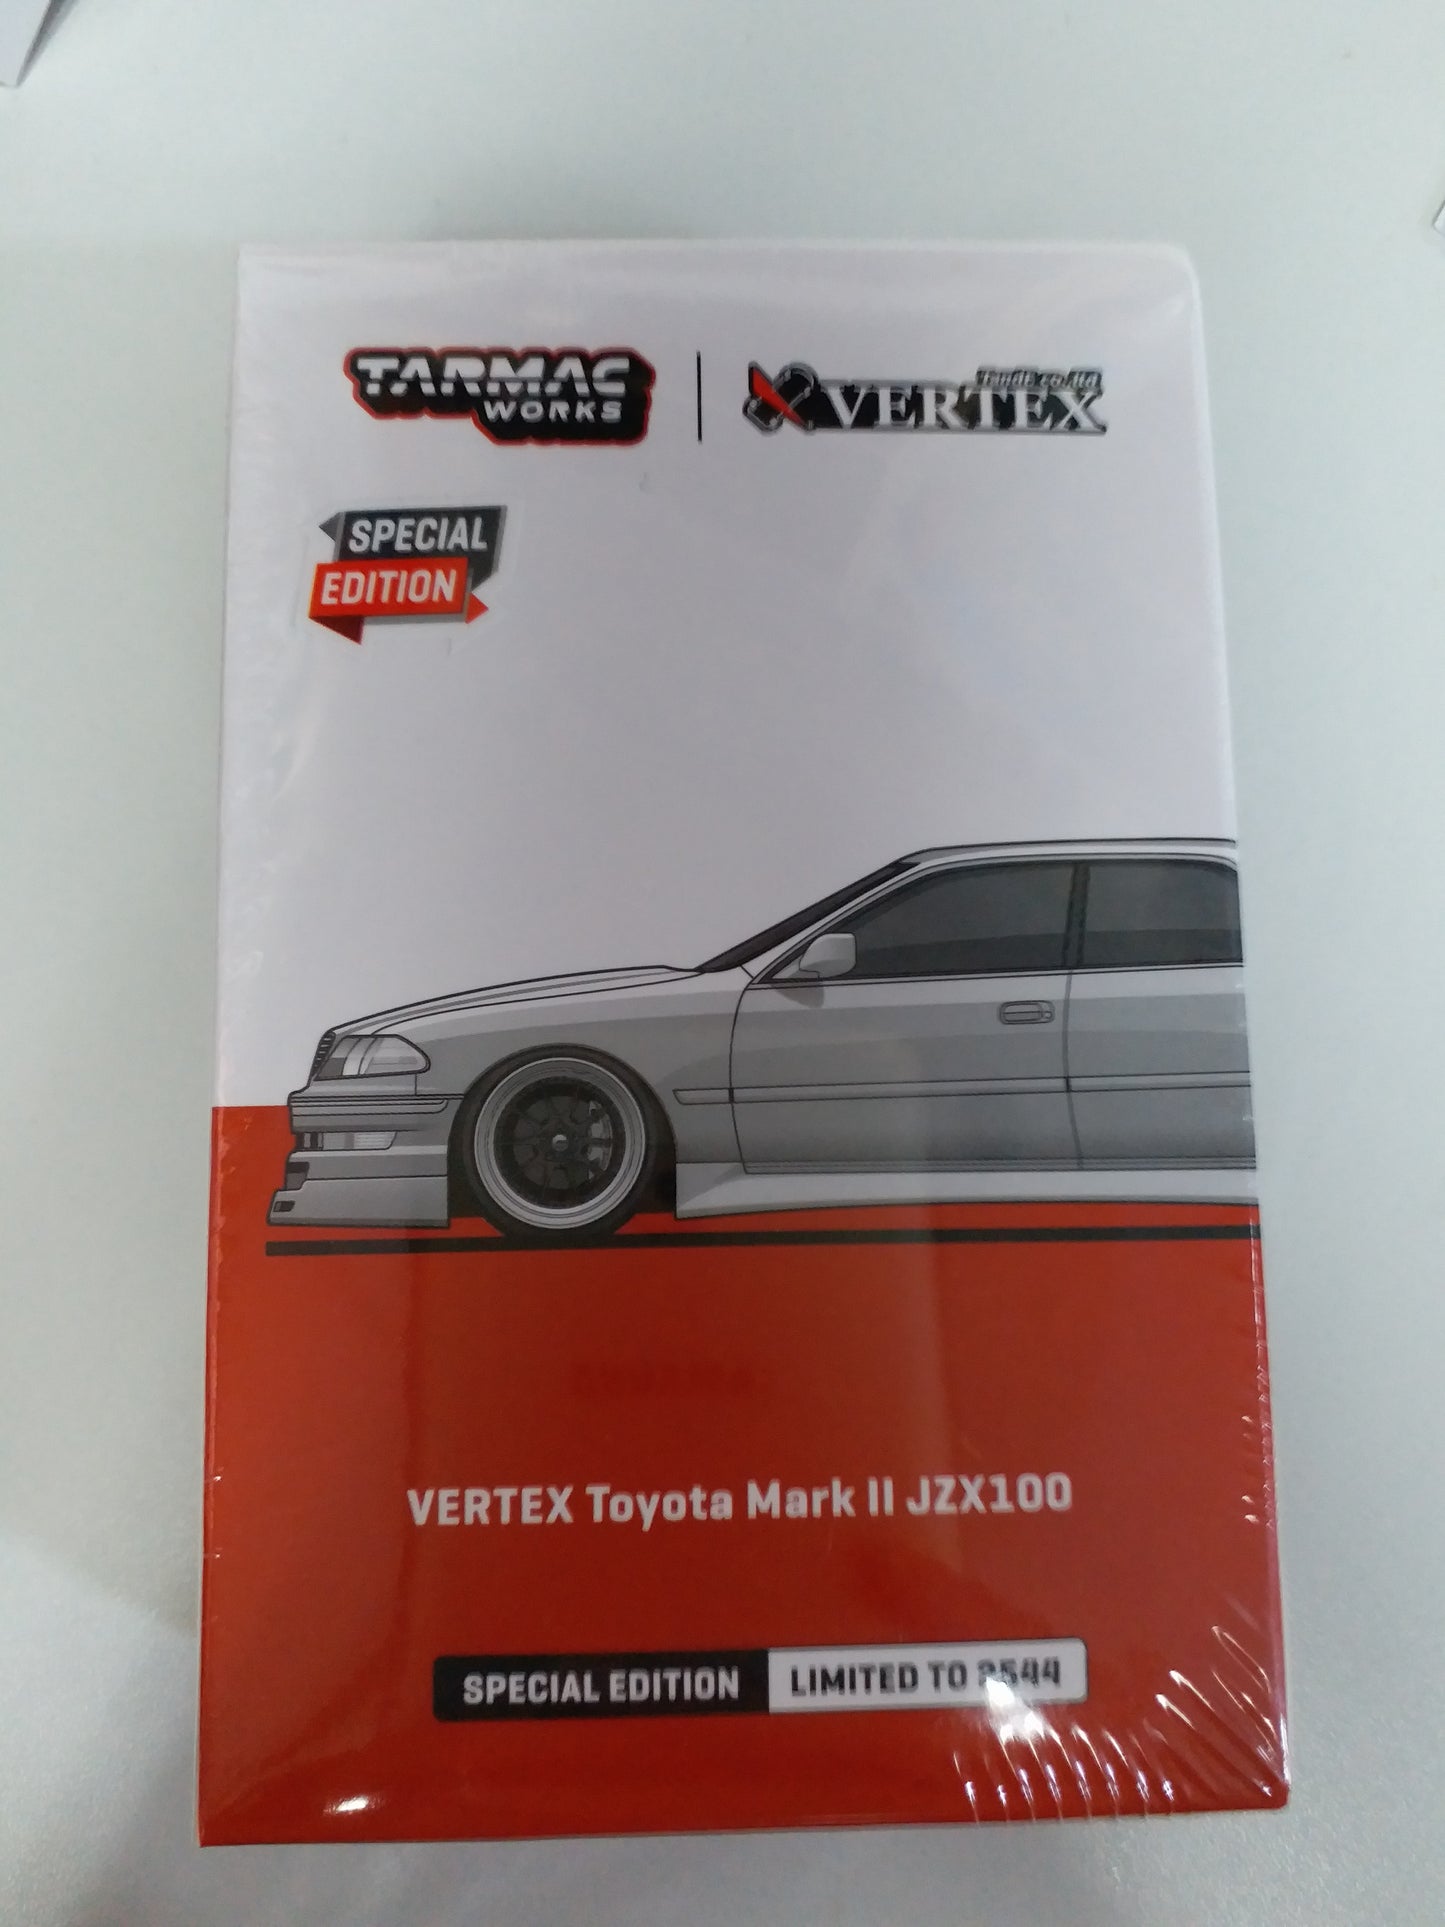 Tarmac Works 1:64 Scale Hong Kong Toy Car Salon 2023 exclusive